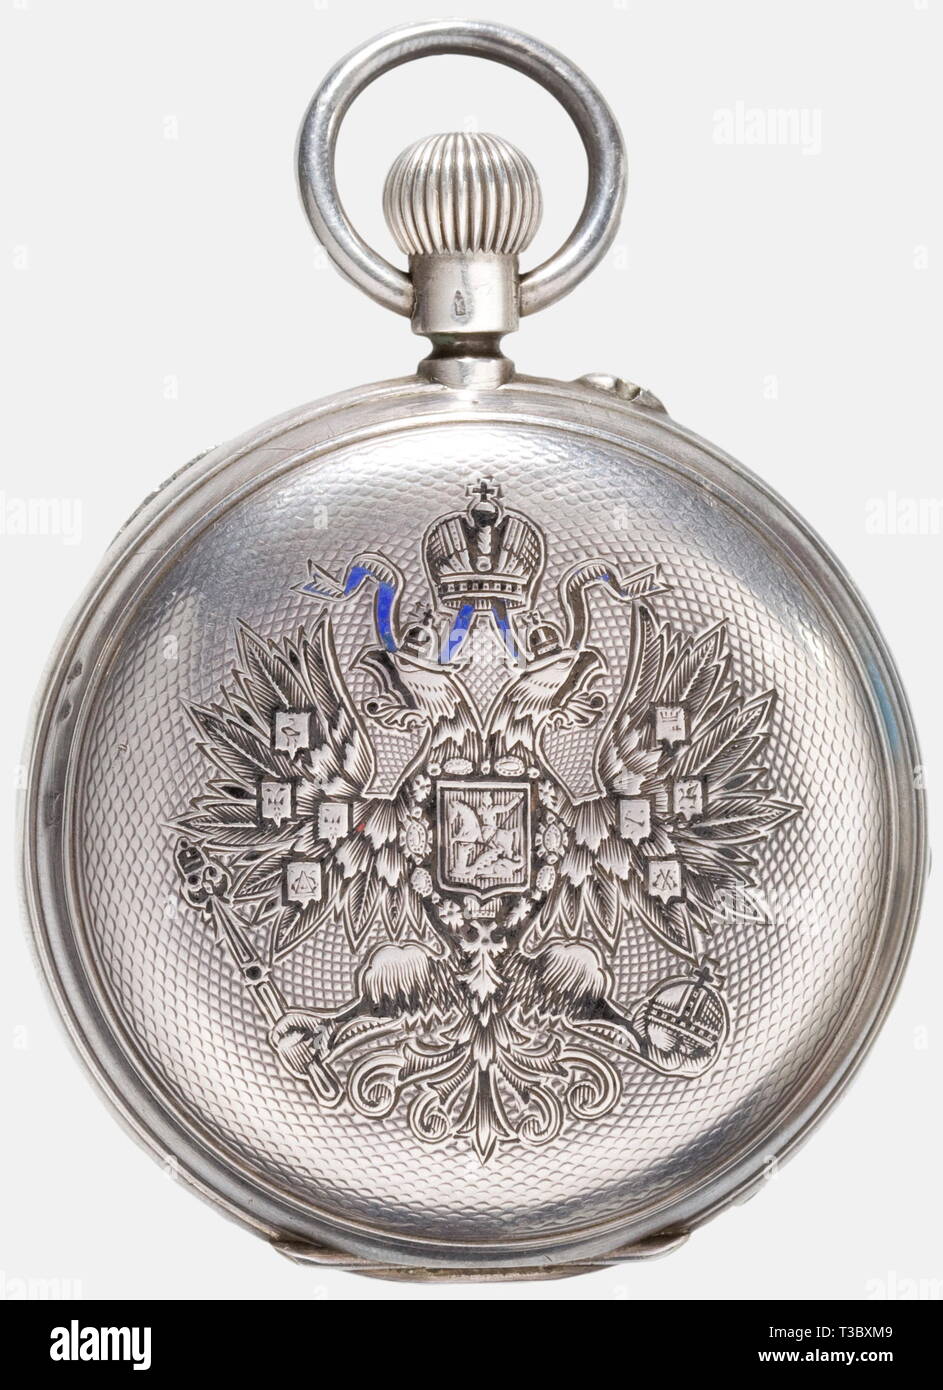 A silver savonette with the Russian double-headed eagle, Pavel Bure, Court Watchmaker and Purveyor to the House of the Tsar The cover displays the partially enamelled blue (chiped) and black Tsarist double-headed eagle of typical Bure quality. White enamel dial with golden lancet hands. Black Roman and Arabic numerals and small second. Functional, jewelled, precision clockwork. Engraved dust cap with the serial number '11919'. Swiss hallmarks '0 875' and 'M Argent' along with the standing bear. Made in Switzerland to the order of Pavel Bure. hist, Additional-Rights-Clearance-Info-Not-Available Stock Photo